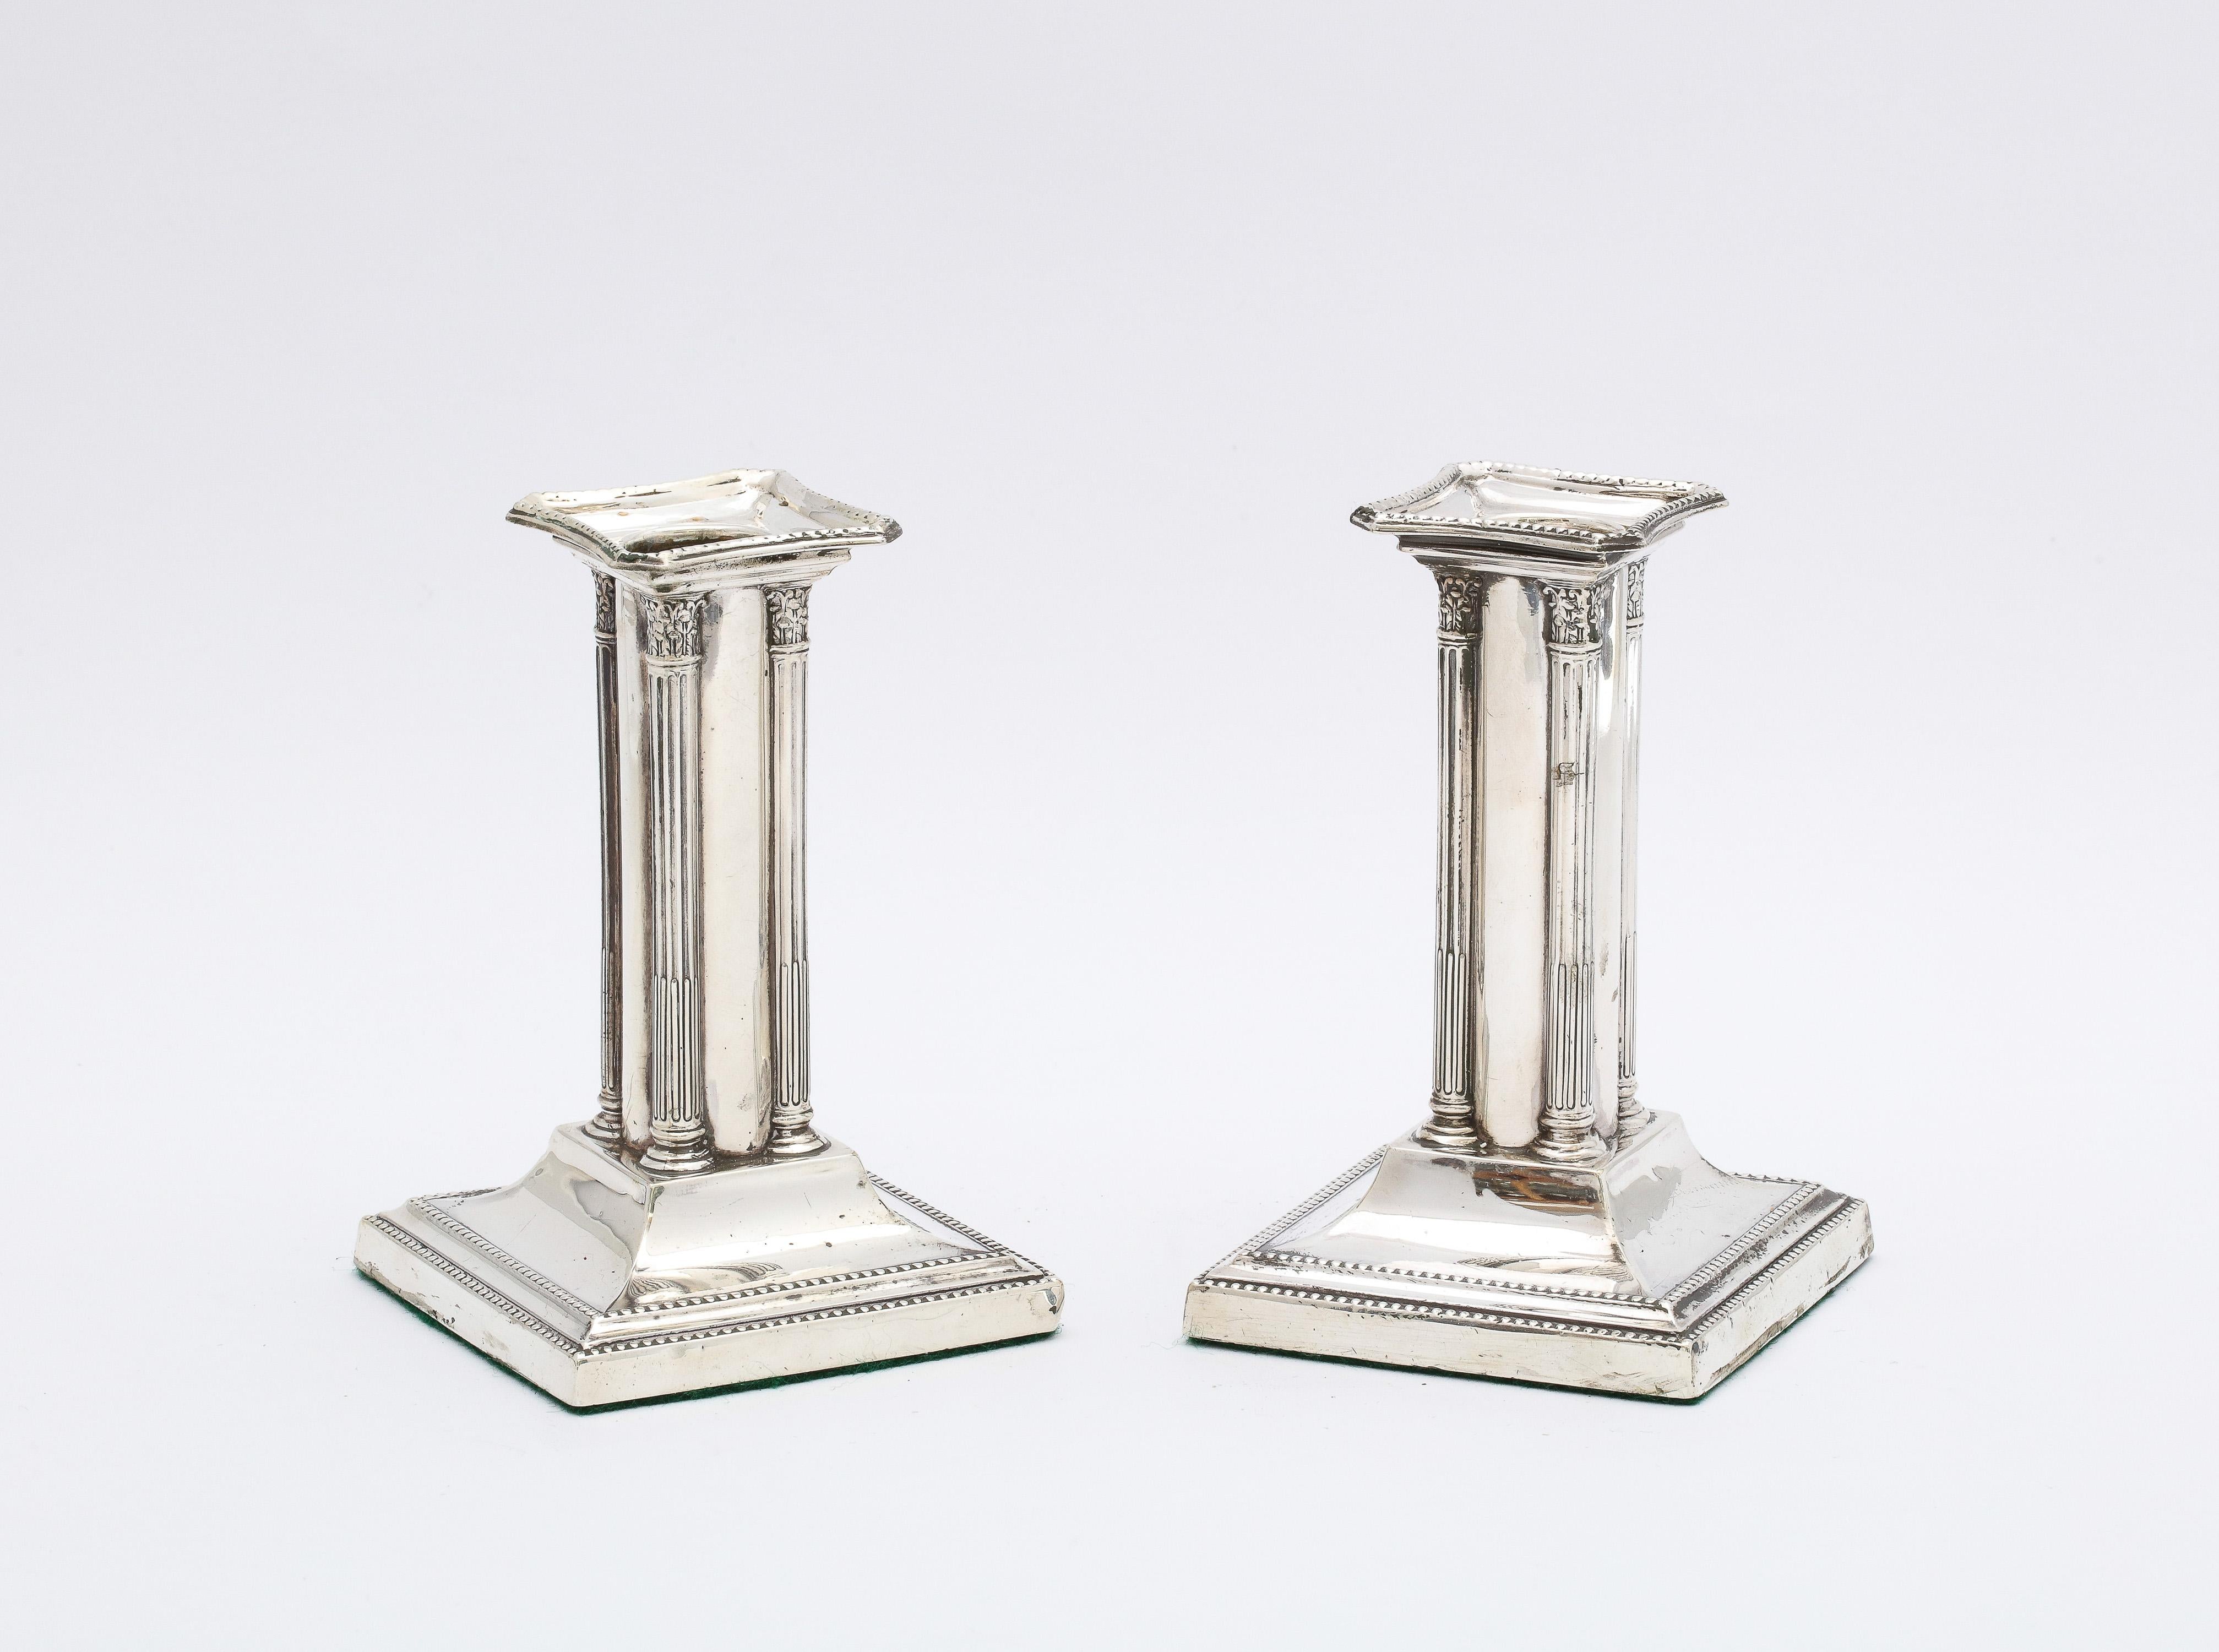 Unusual short  pair of Edwardian Period, Neoclassical-style sterling silver candlesticks, Sheffield, England, year-hallmarked for 1904, Thomas Bradbury and Sons, Ltd. - makers. Each candlestick measures 3 3/4 inches high x 2 1/4 inches wide (at